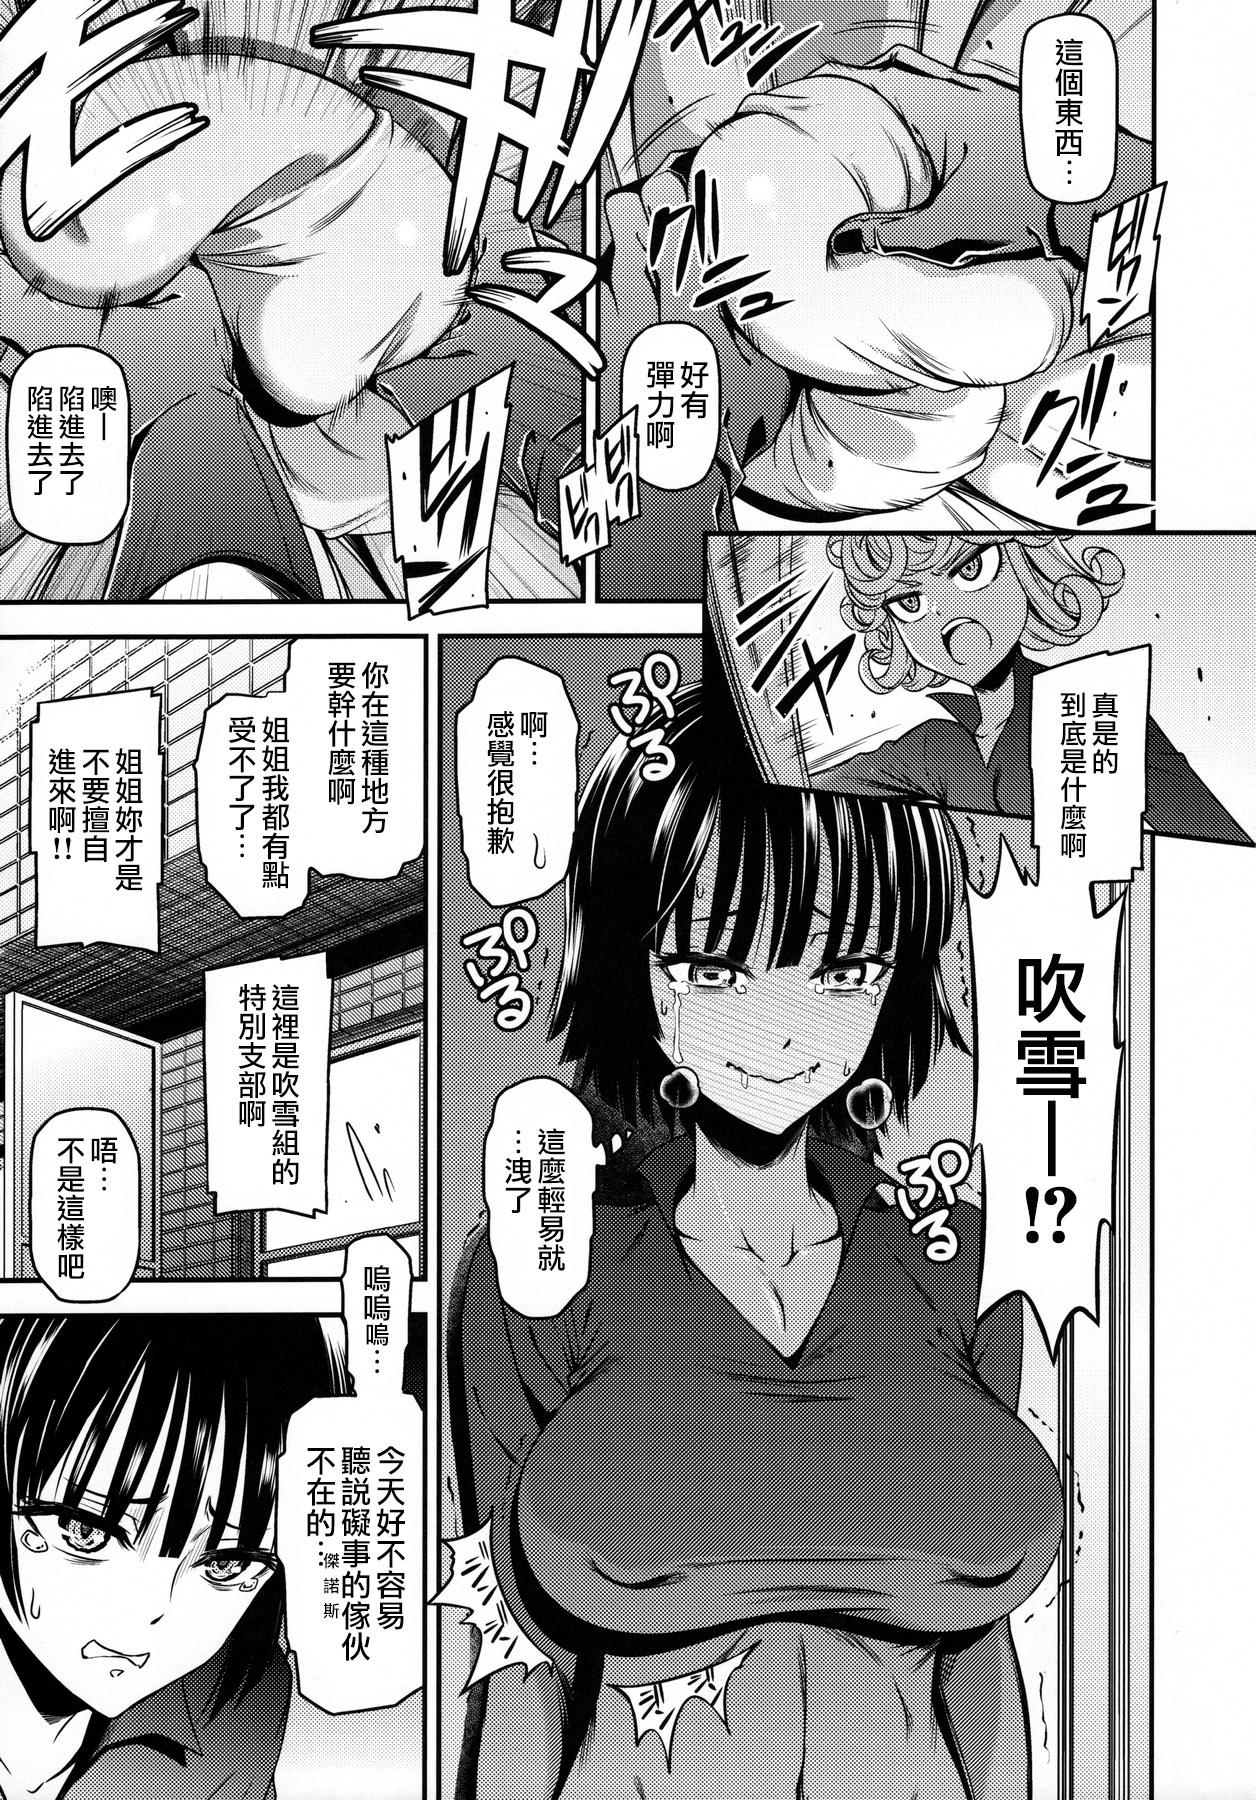 Street ONE-HURRICANE 4 - One punch man Bokep - Page 6